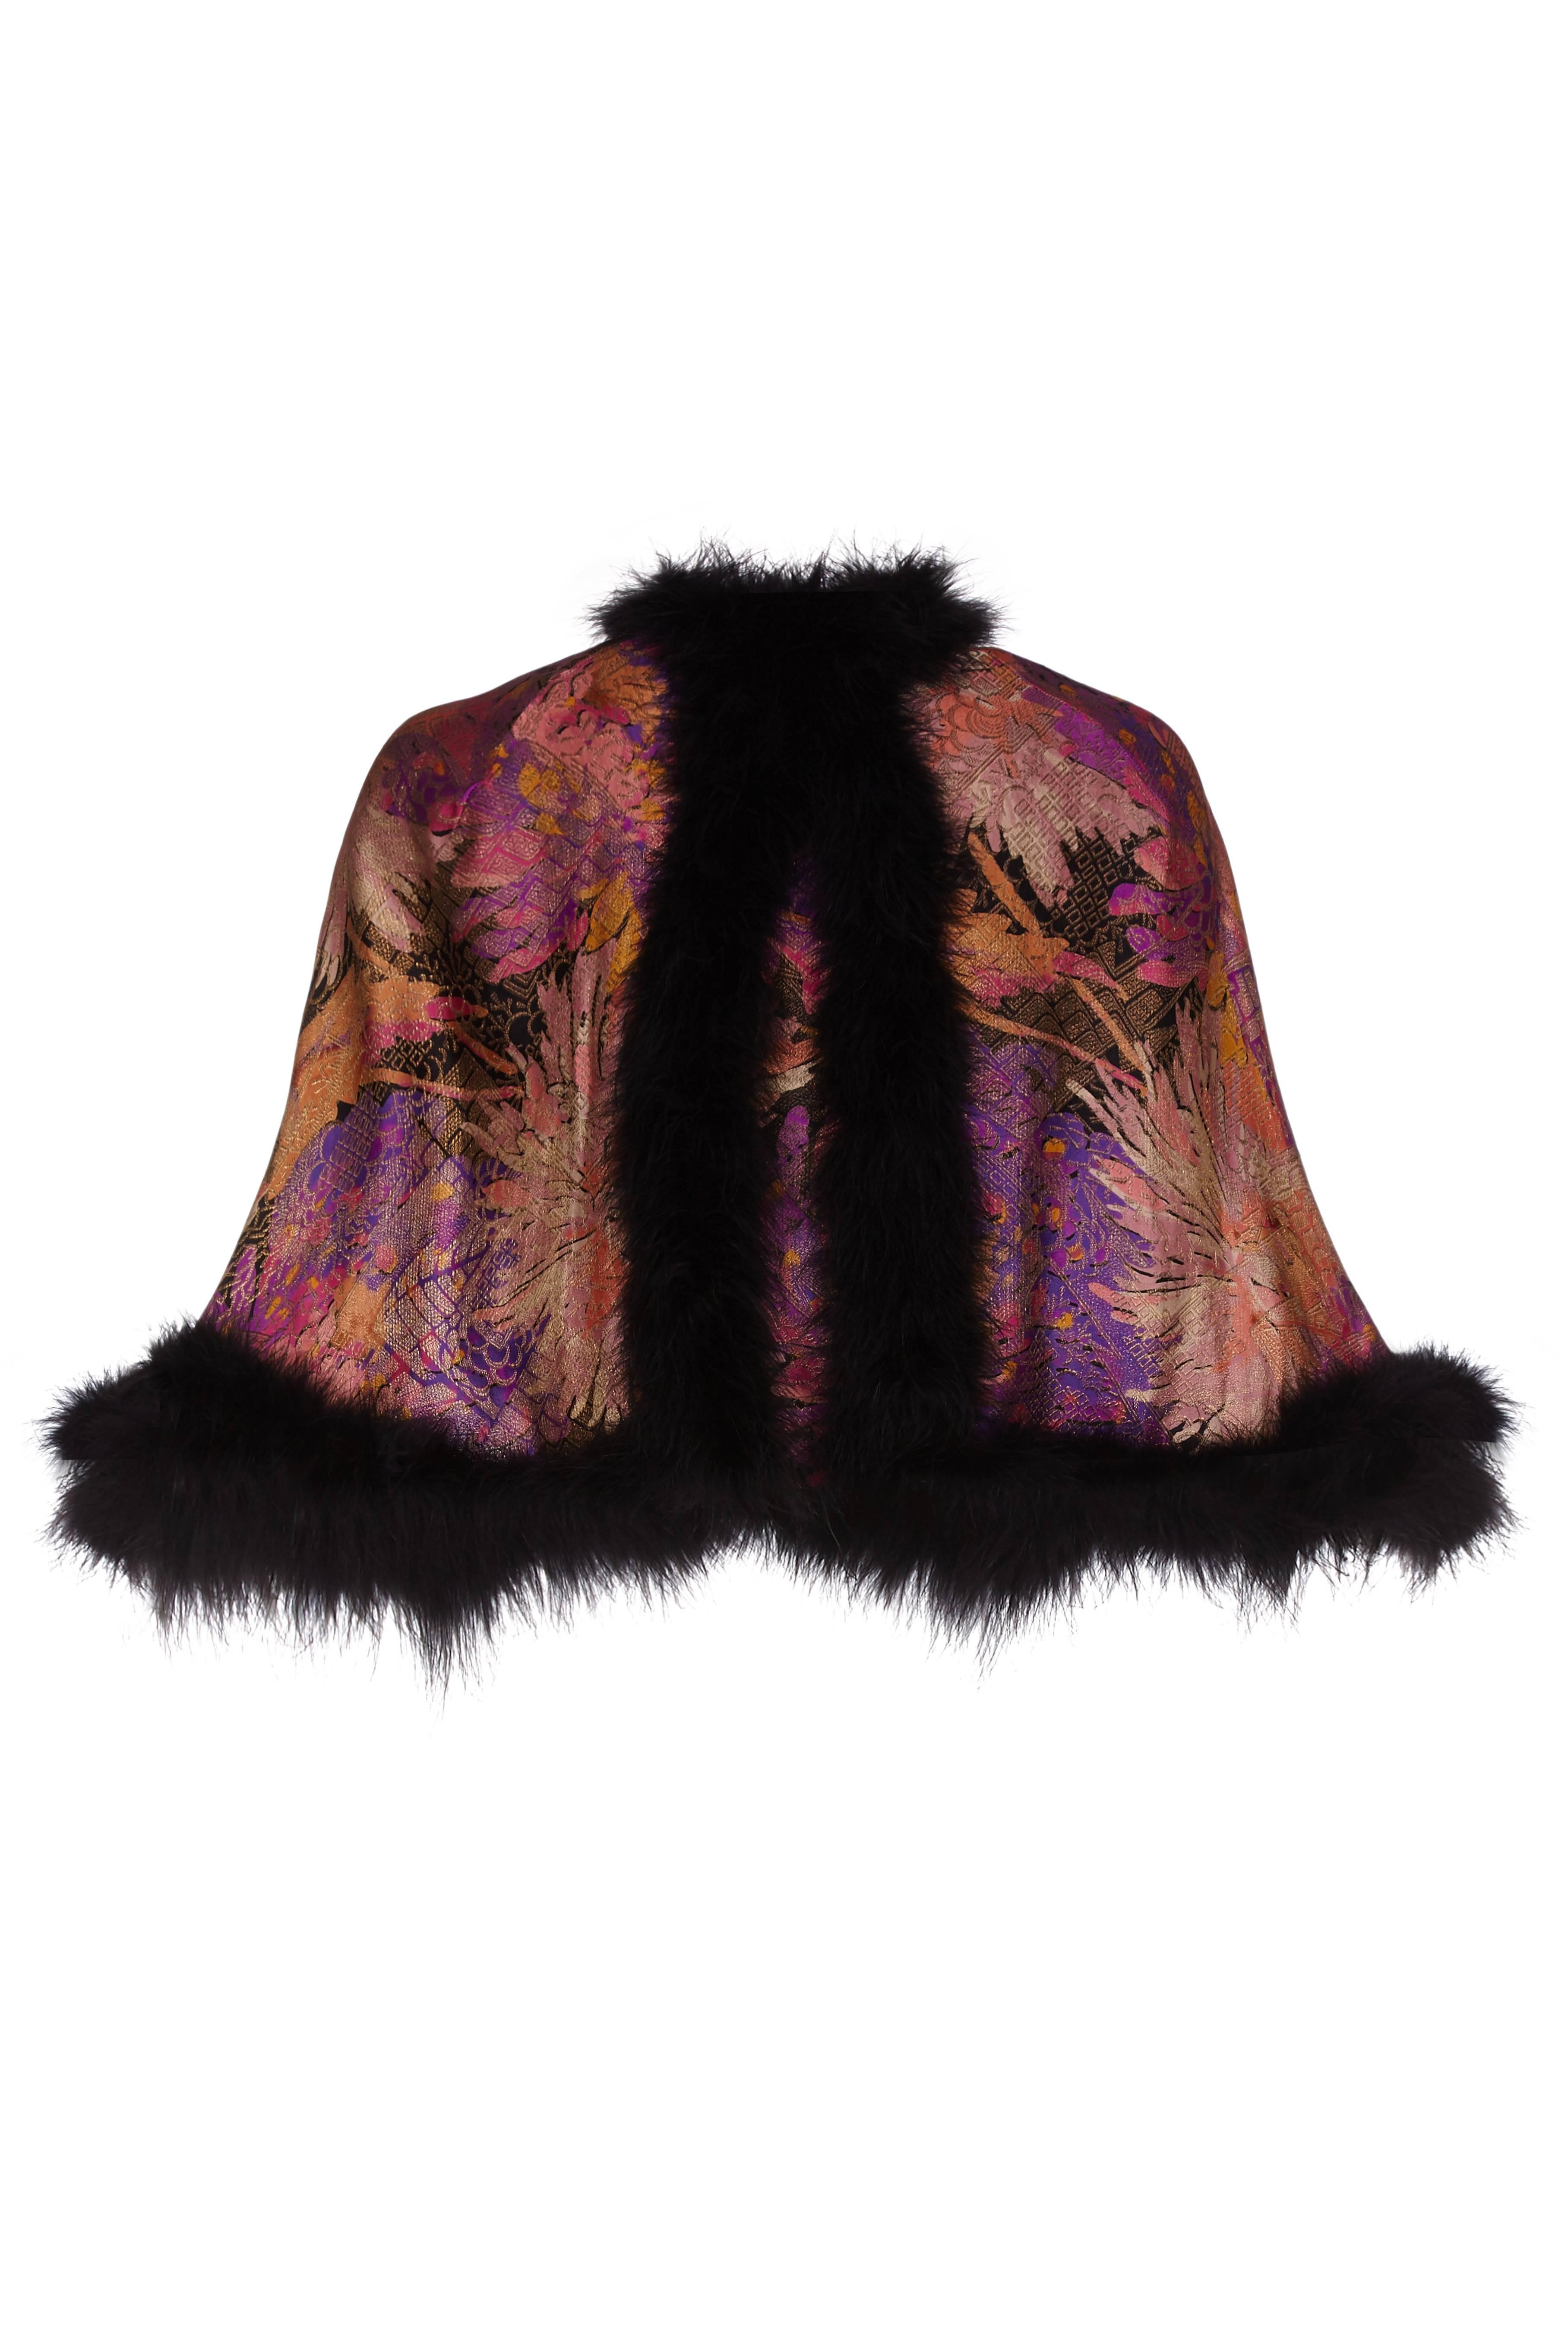 Gorgeous vintage 1920s pink,purple and black lame cape with black feather trim and gold frogging fastening. This versatile piece has a very oriental feel and would make a lovely accessory for an evening out.  It is in excellent vintage condition